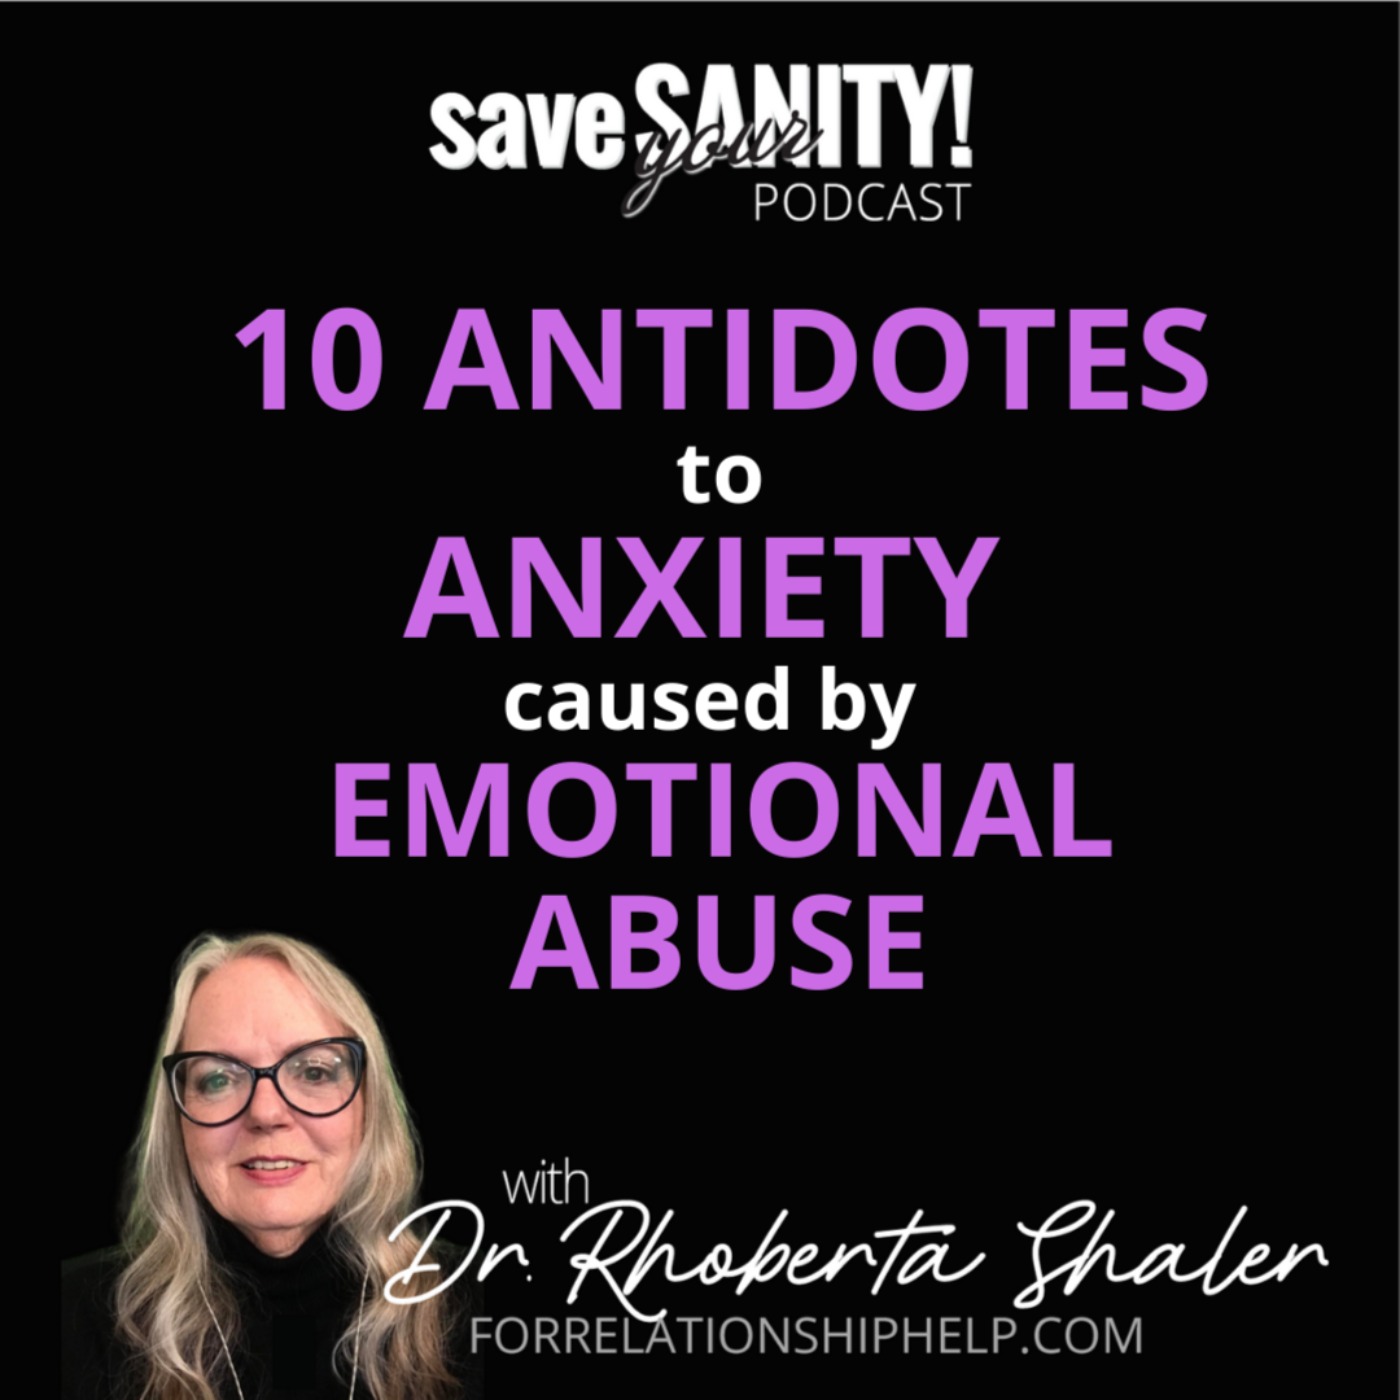 10 Antidotes to Anxiety Caused By Emotional Abuse